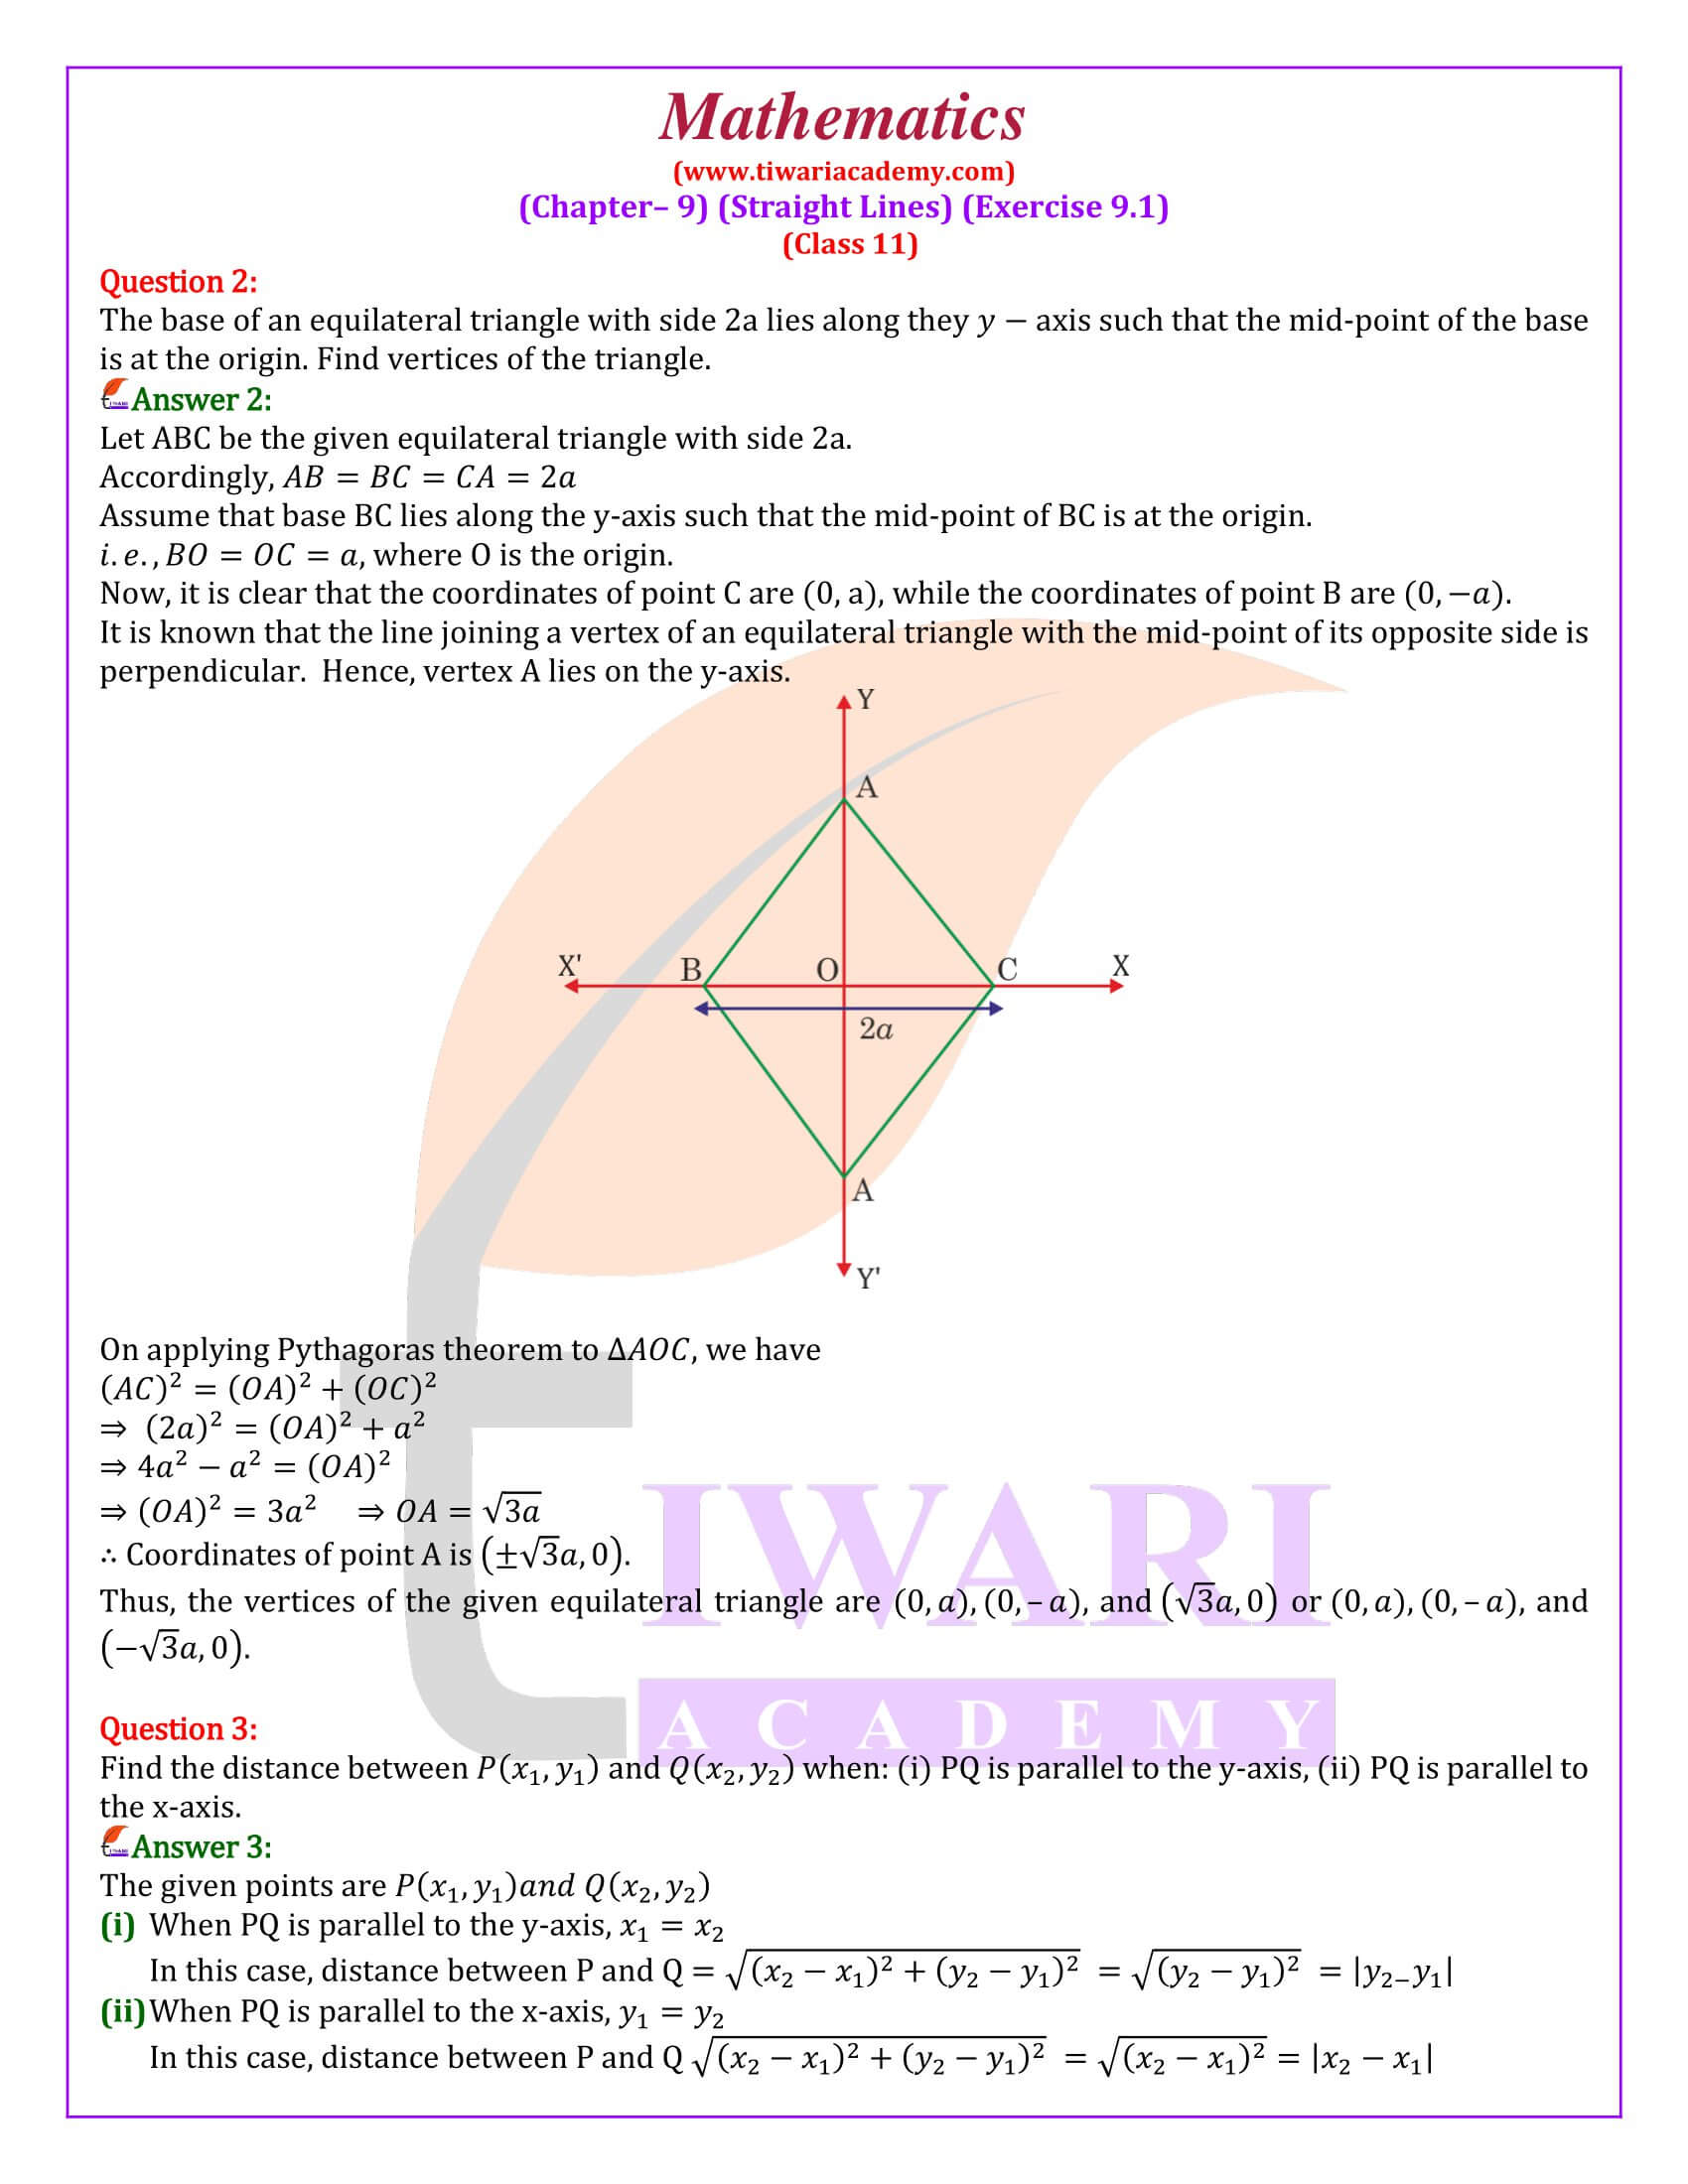 NCERT Solutions for Class 11 Maths Chapter 9 Exercise 9.1 revised and updated